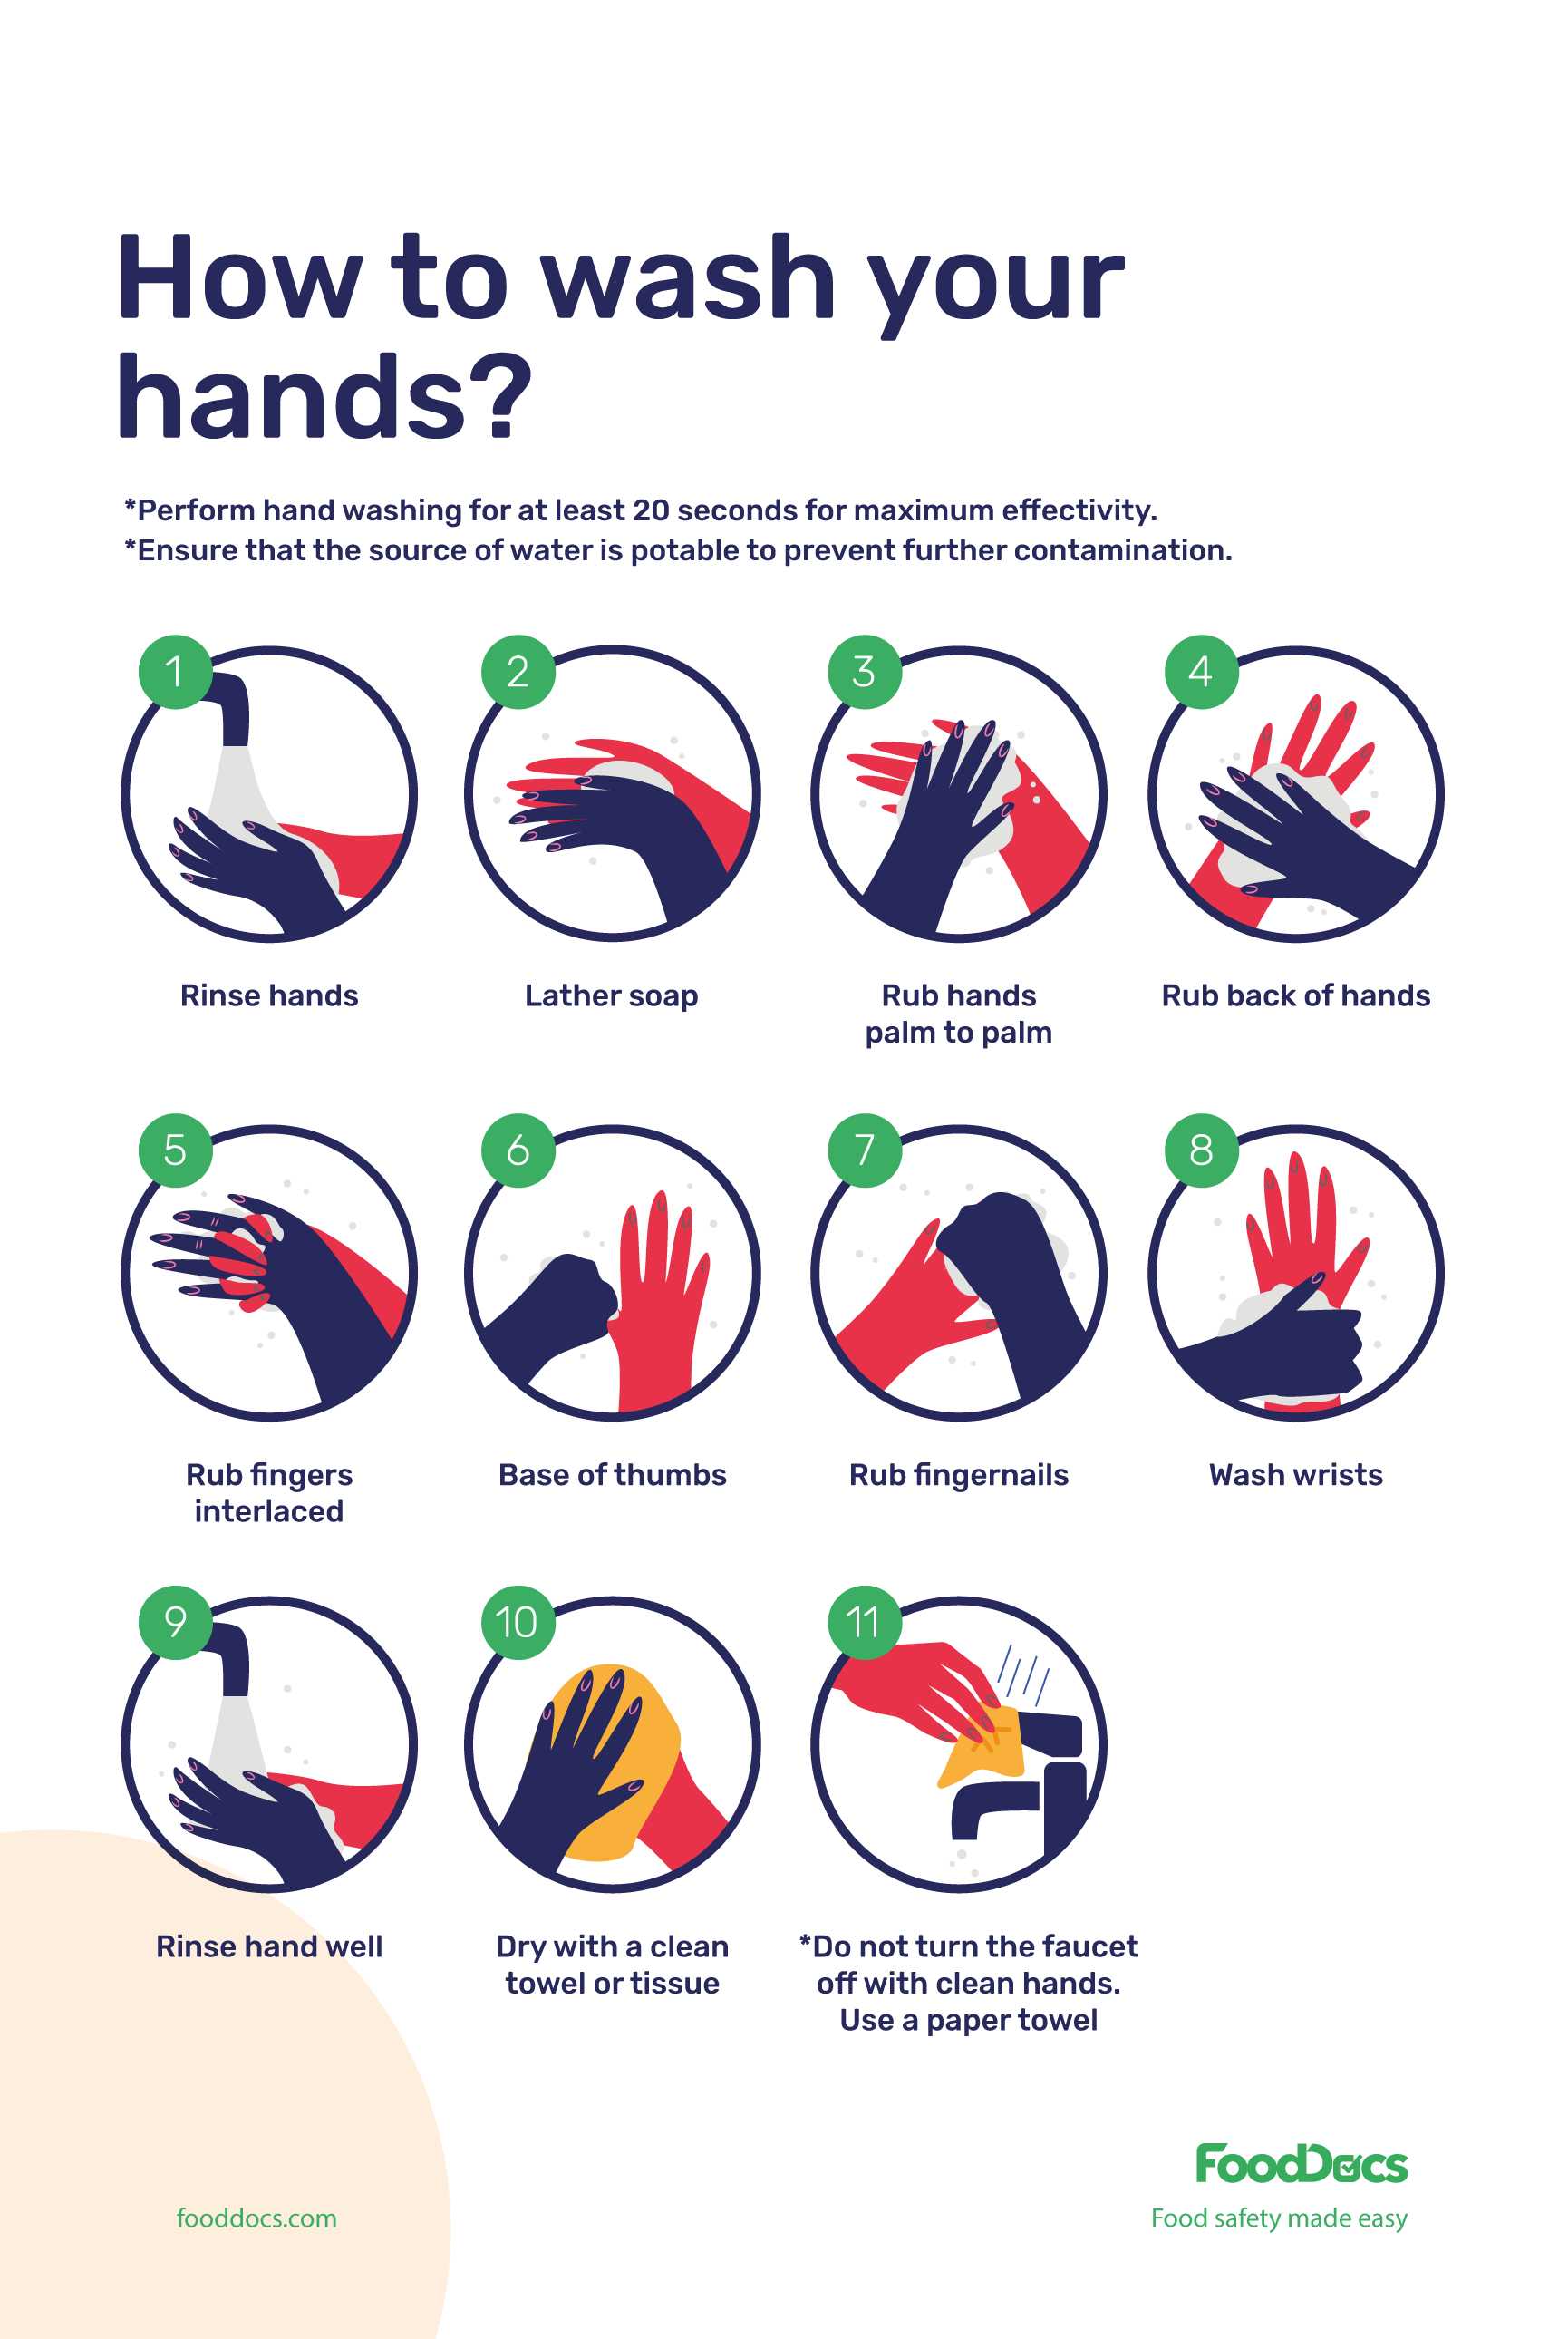 what is the correct order of steps for handwashing-1